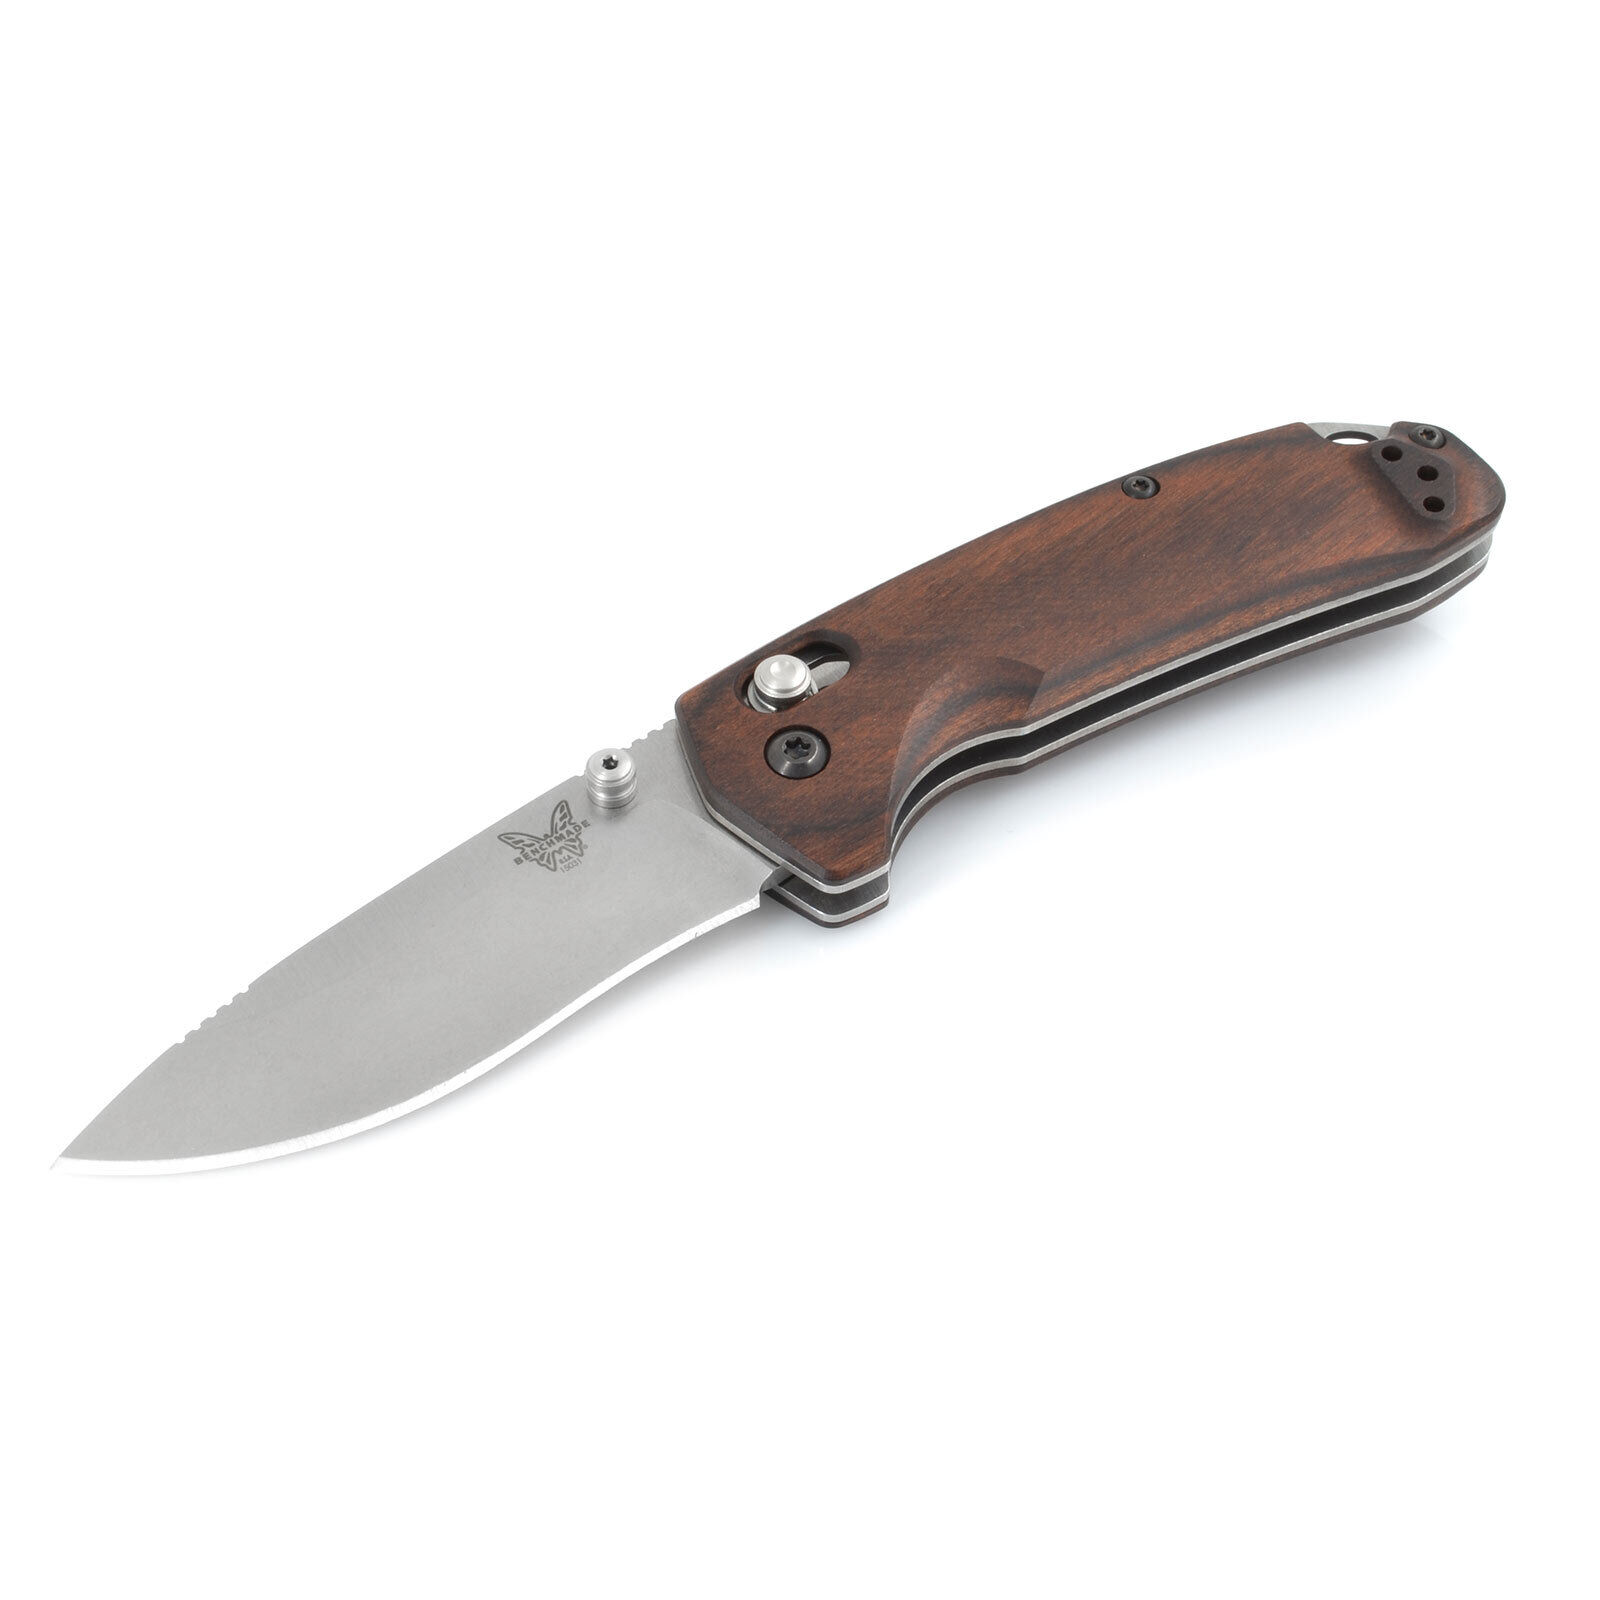 Benchmade Knife North Fork Stabilized Wood Handle Steel Blade Axis Lock 15031-2